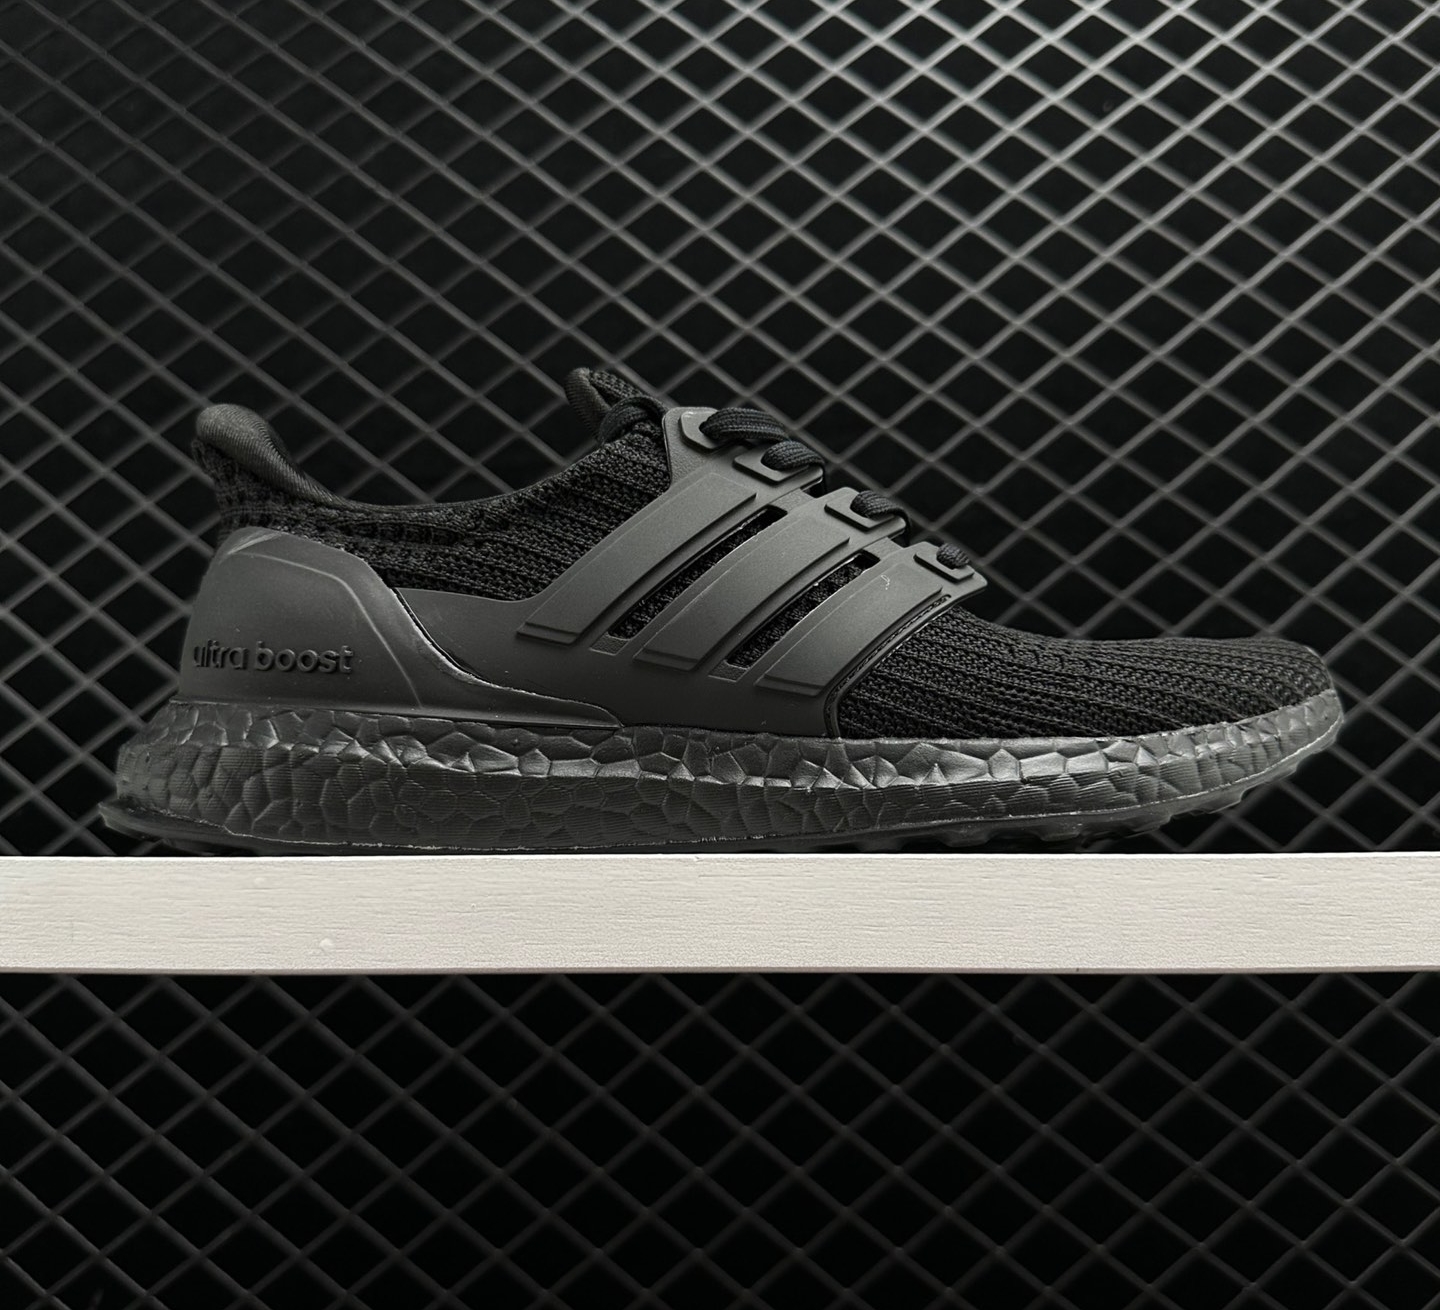 Adidas UltraBoost 3.0 Limited Triple Black 2.0 - CG3038 | Brand New Releases